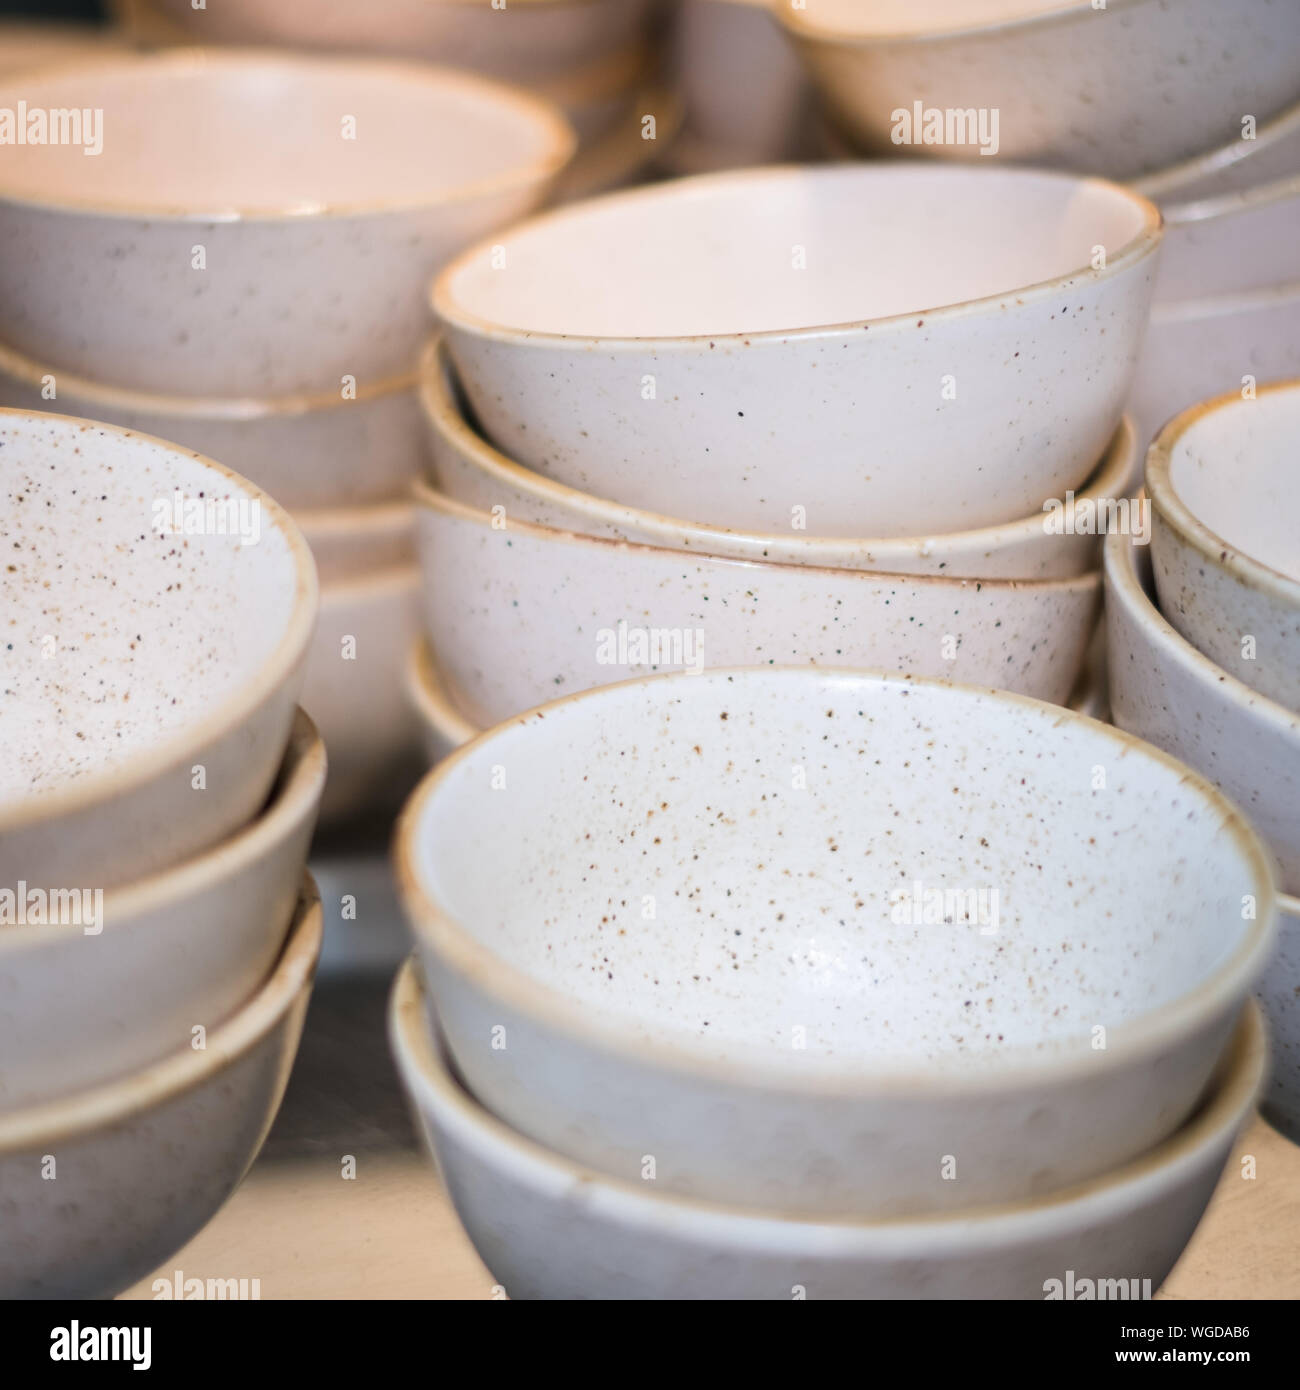 Close-up of Bowls On Table Banque D'Images